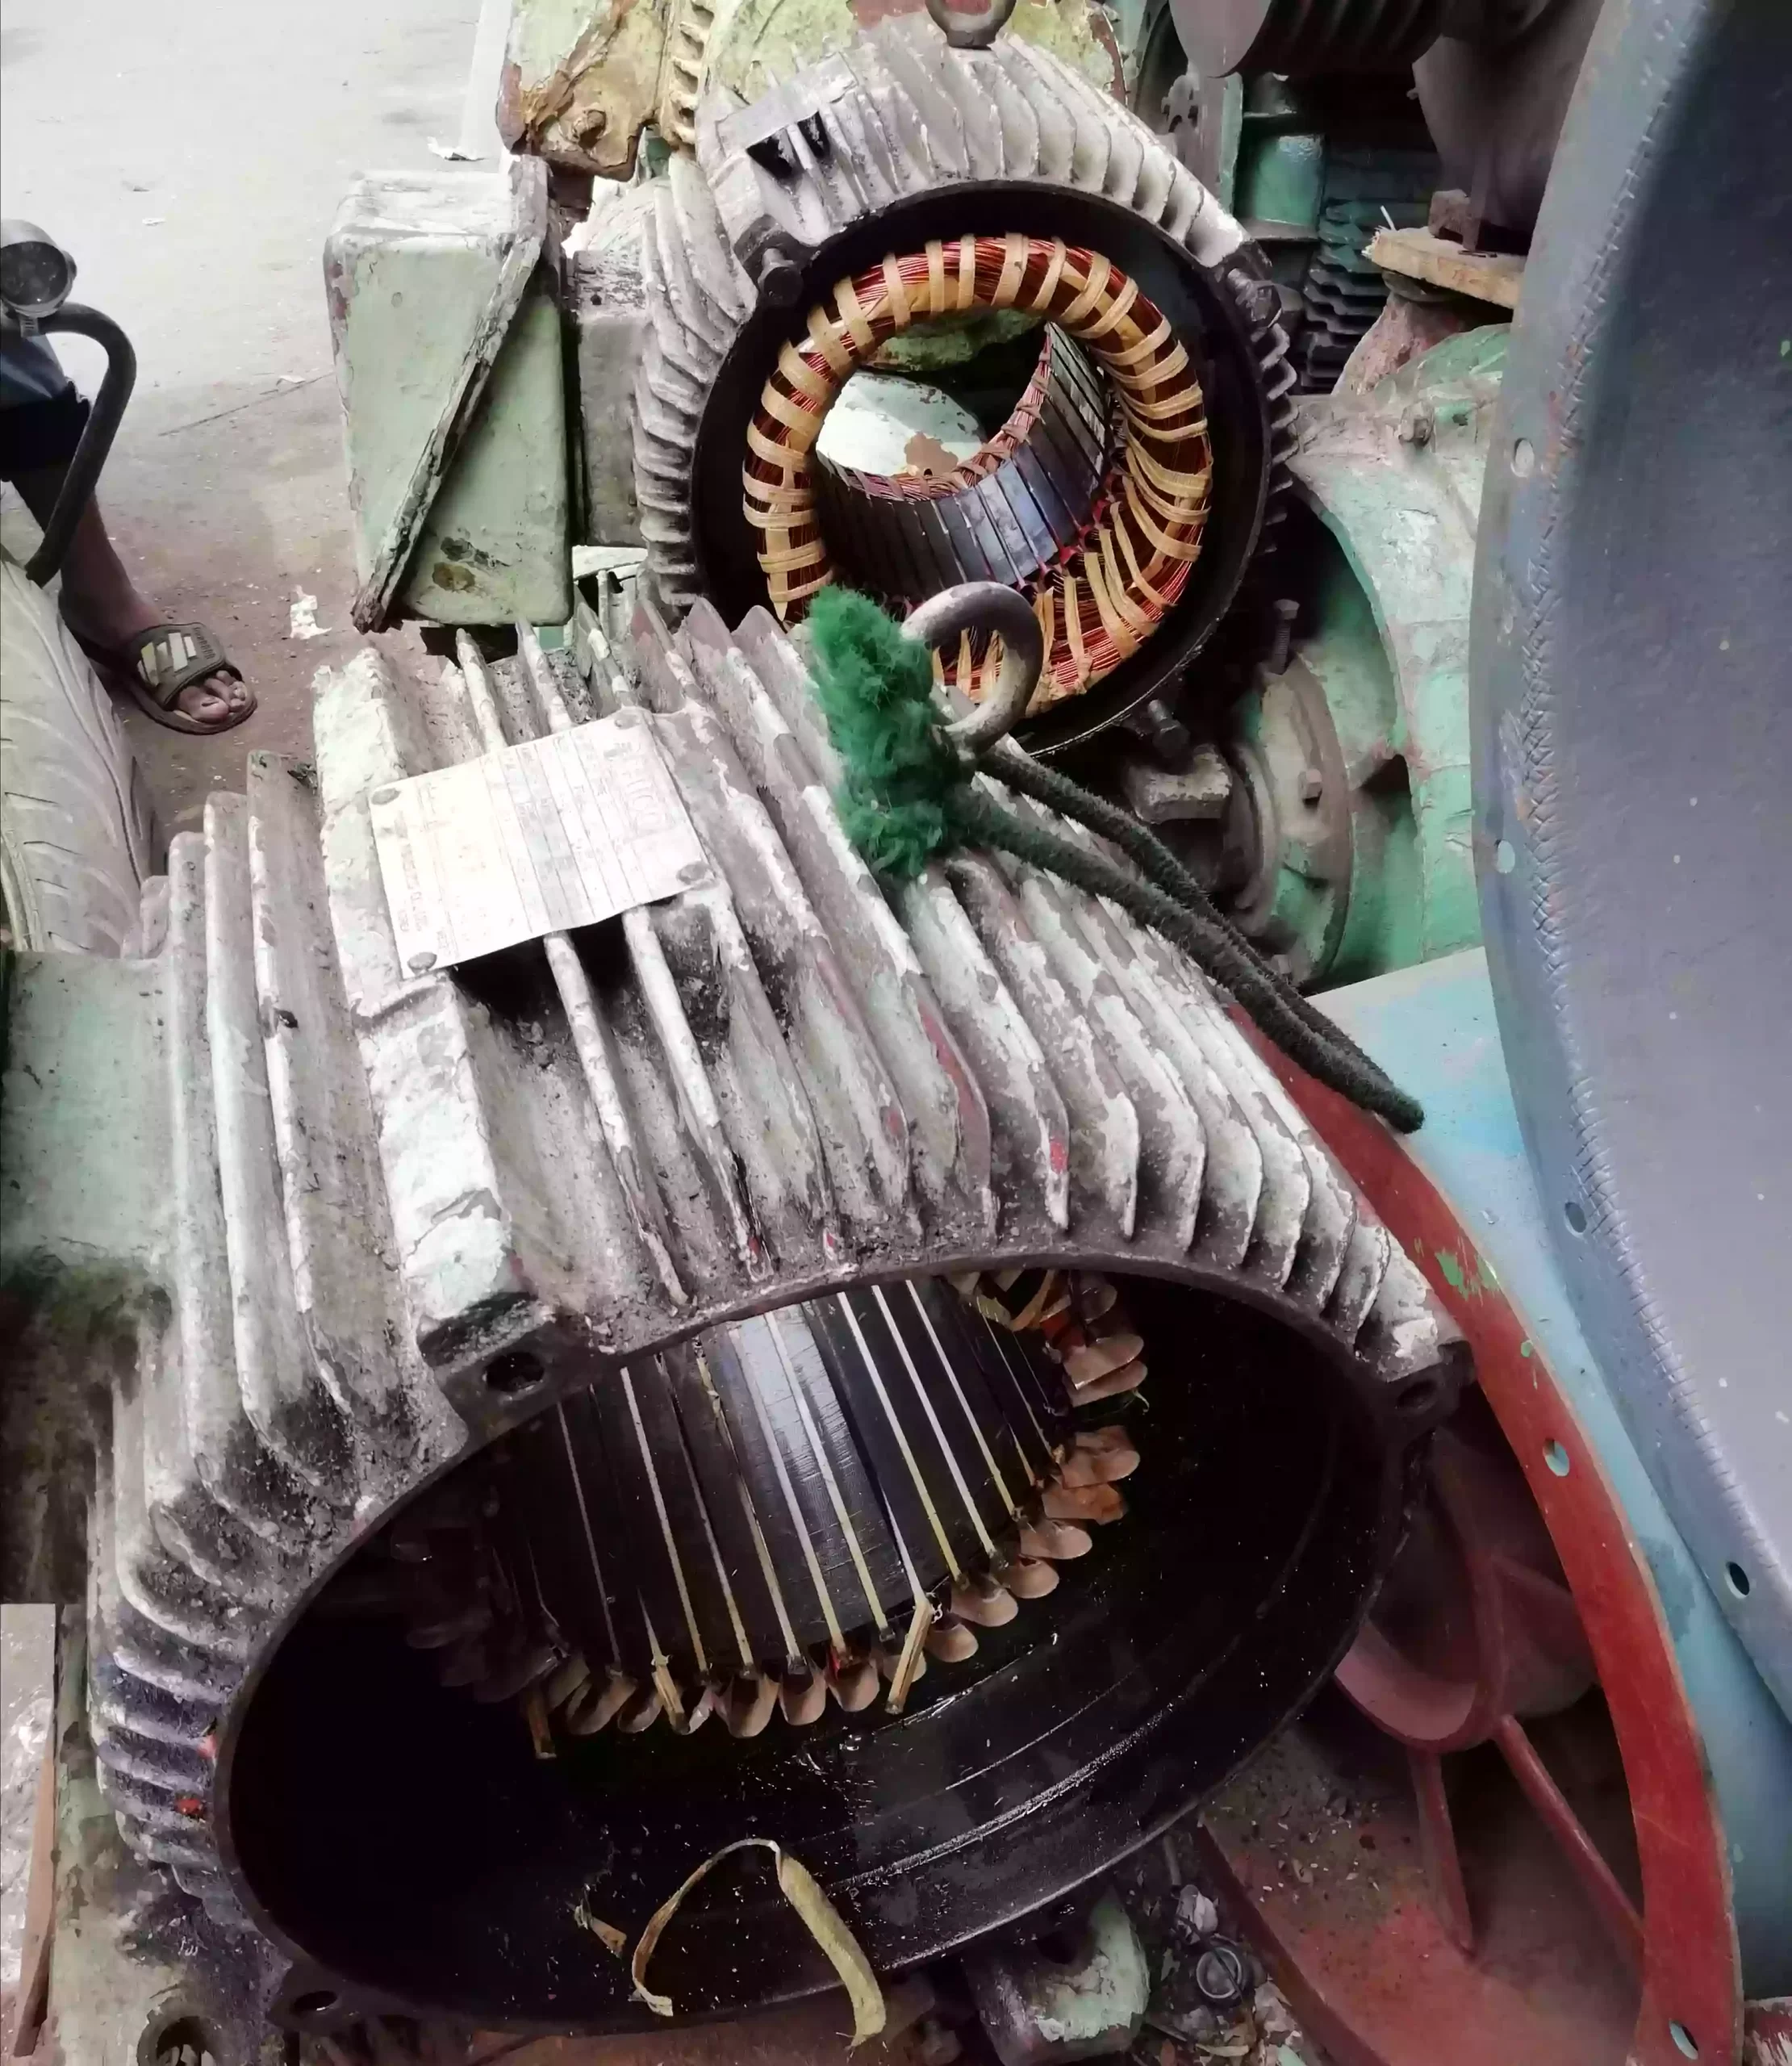 Motor Scraps From Scrap Shipyard, Mills, Factories Are Available in Pride Bangladesh Call: +8801881212987